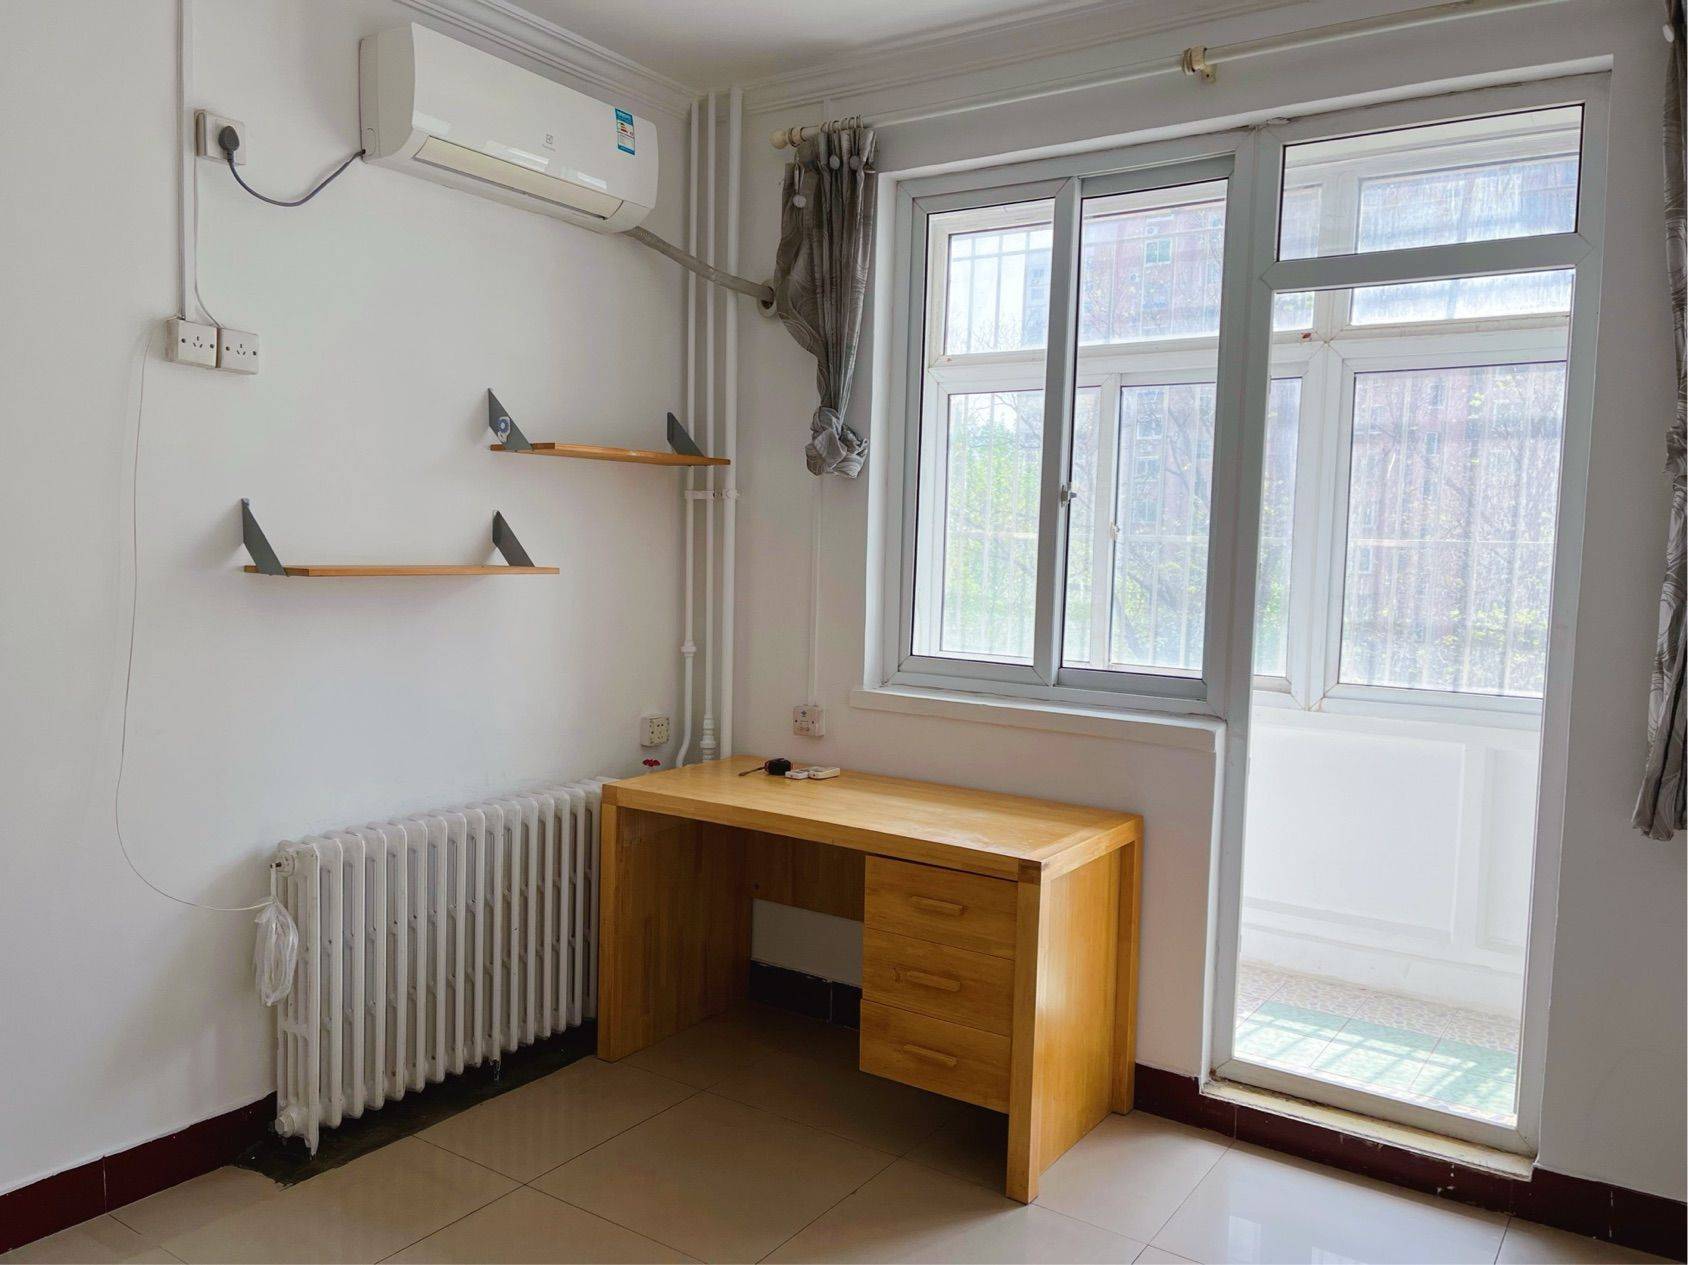 Beijing-Dongcheng-Cozy Home,Clean&Comfy,No Gender Limit,Chilled,LGBTQ Friendly,Pet Friendly